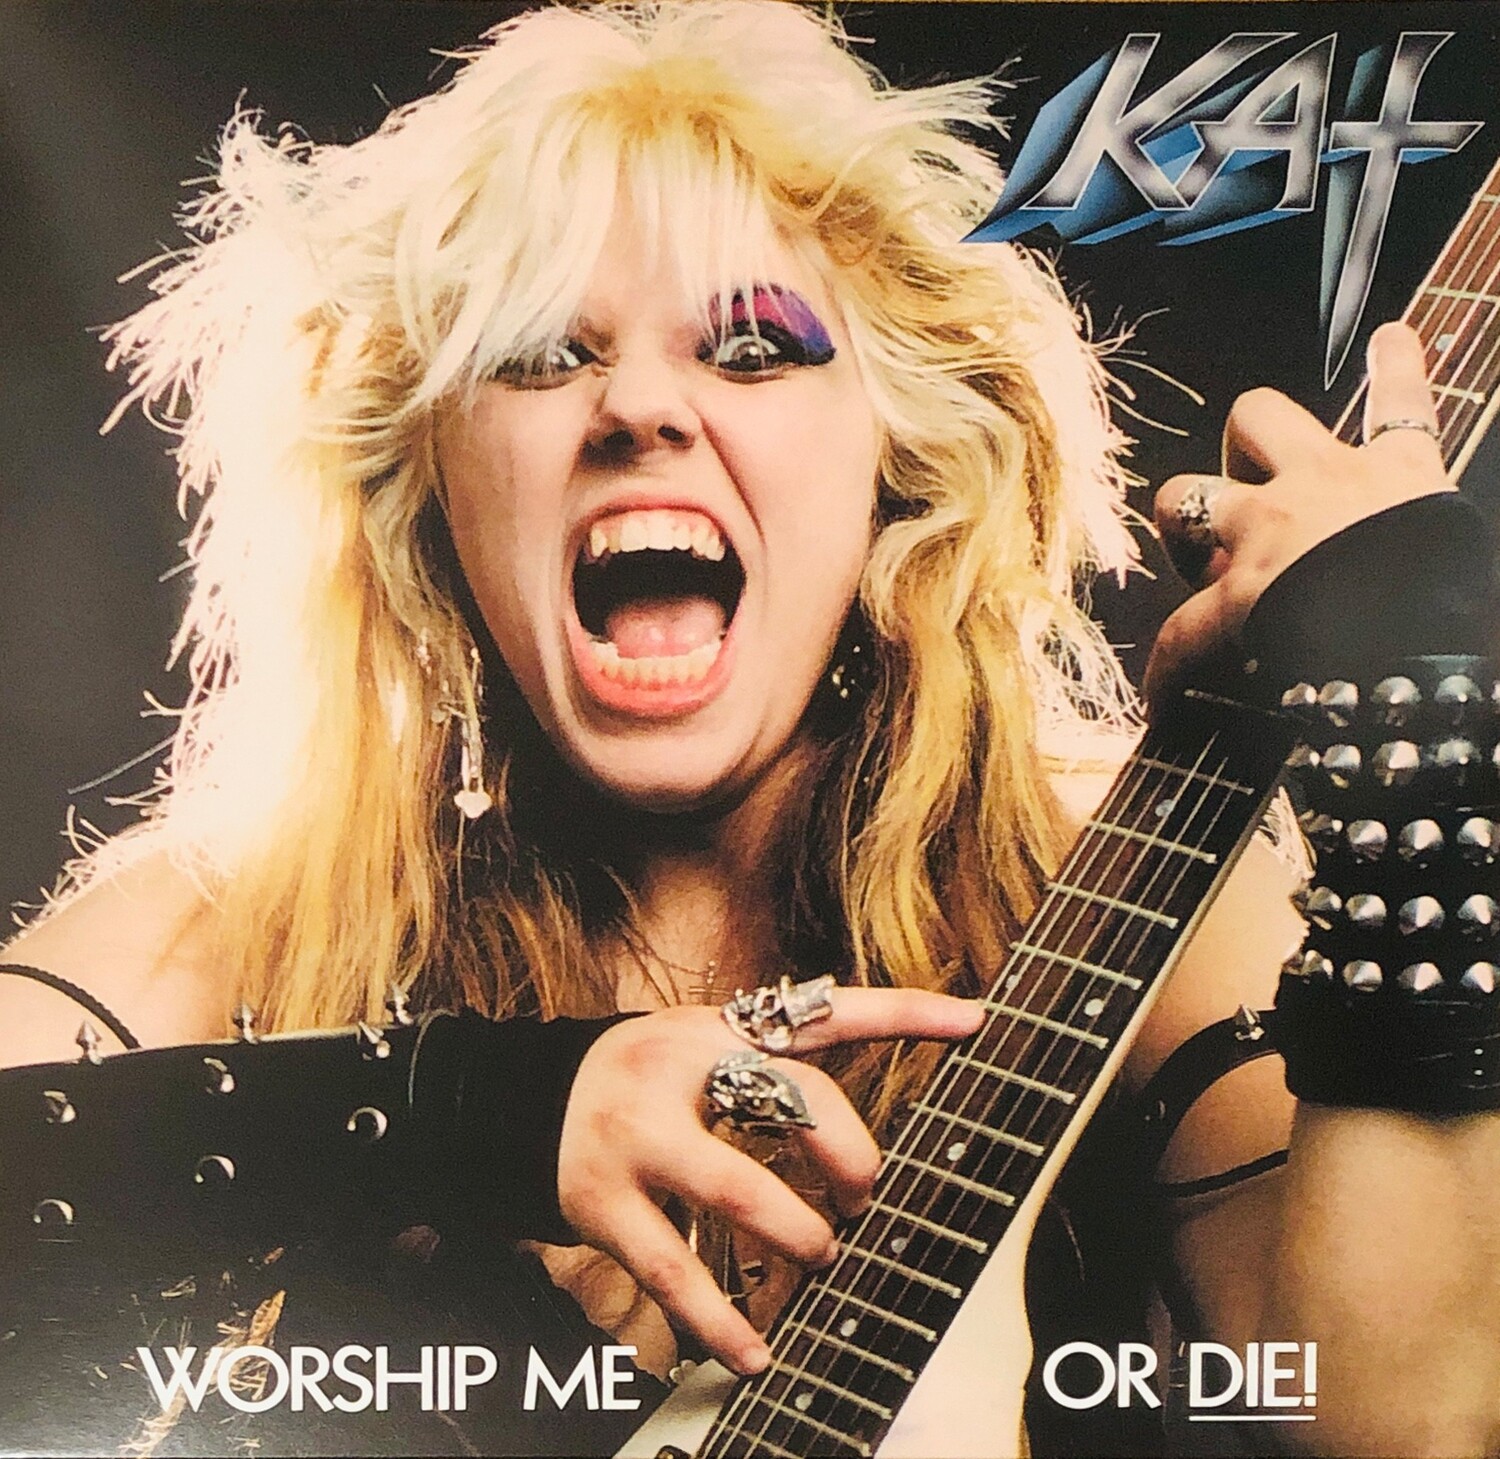 “WORSHIP ME OR DIE!” VINYL DEBUT ALBUM RECORD OR &quot;SATAN SAYS&quot; VINYL EP RECORD! PERSONALIZED AUTOGRAPHED by THE GREAT KAT! INFO IS BELOW! (Signed to Customer) Limited Quantities!!